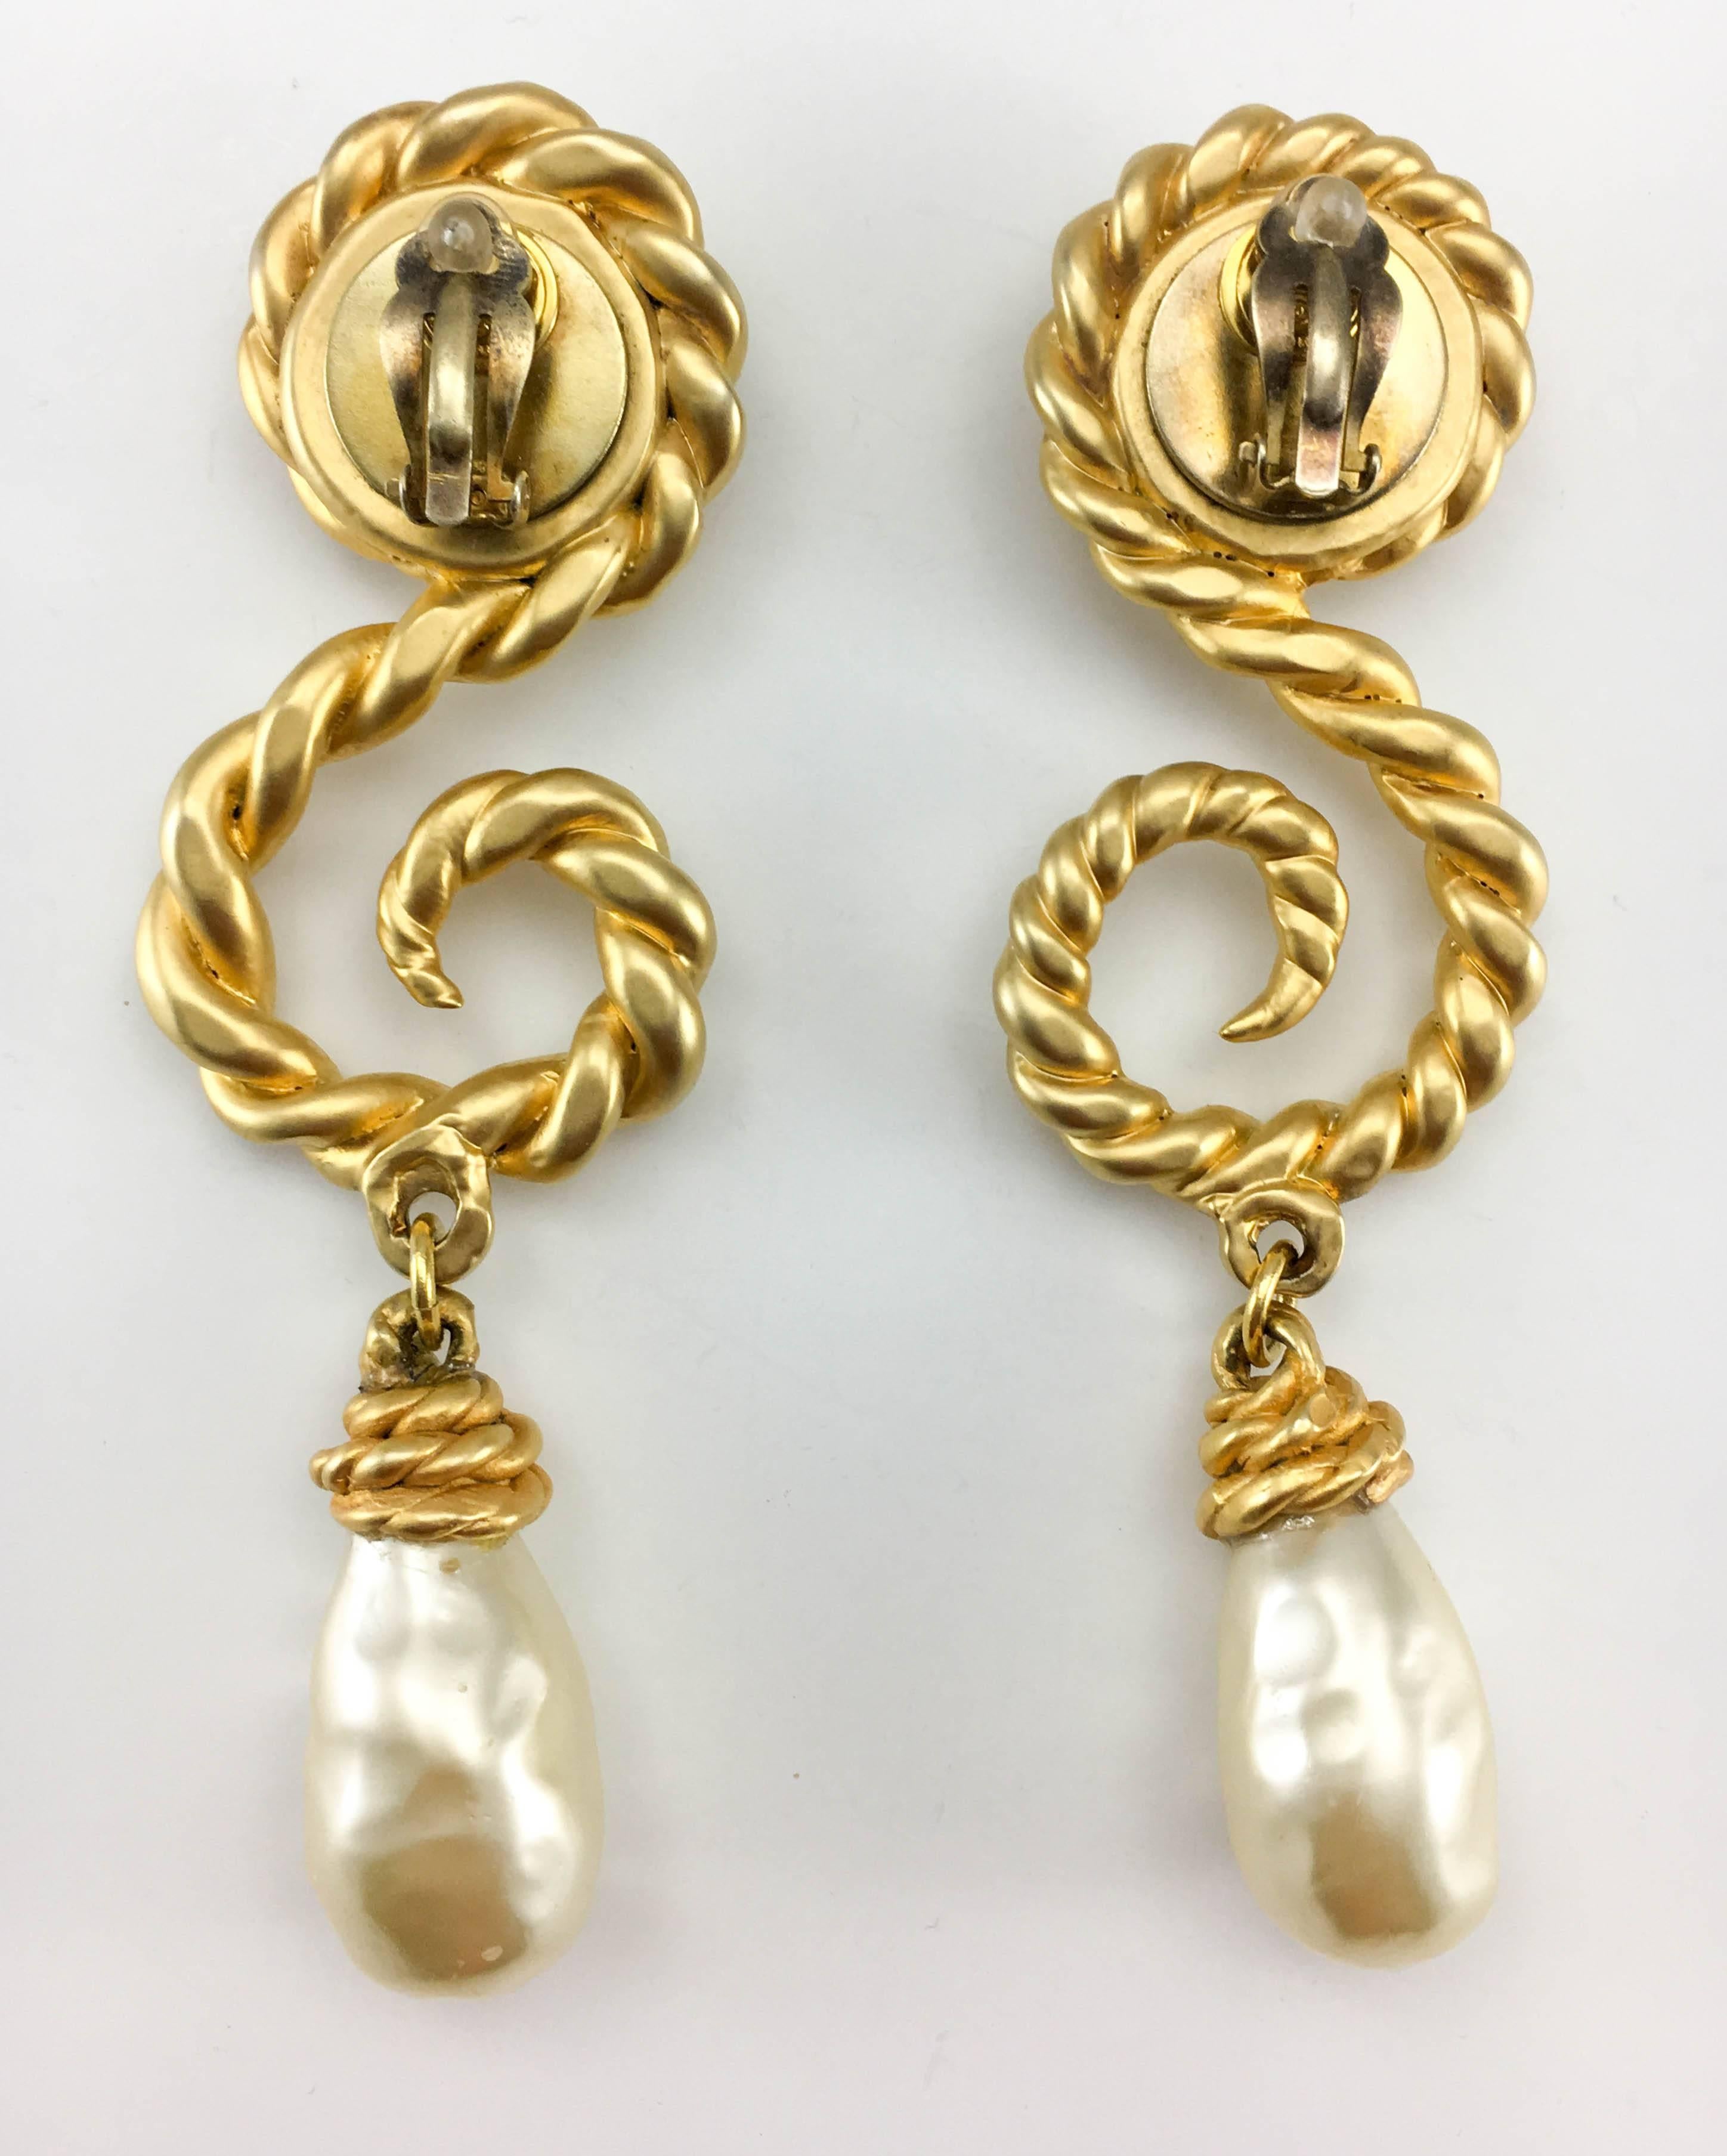 Chanel 1990 Runway Look Massive Arabesque and Baroque Pearl Earrings 6